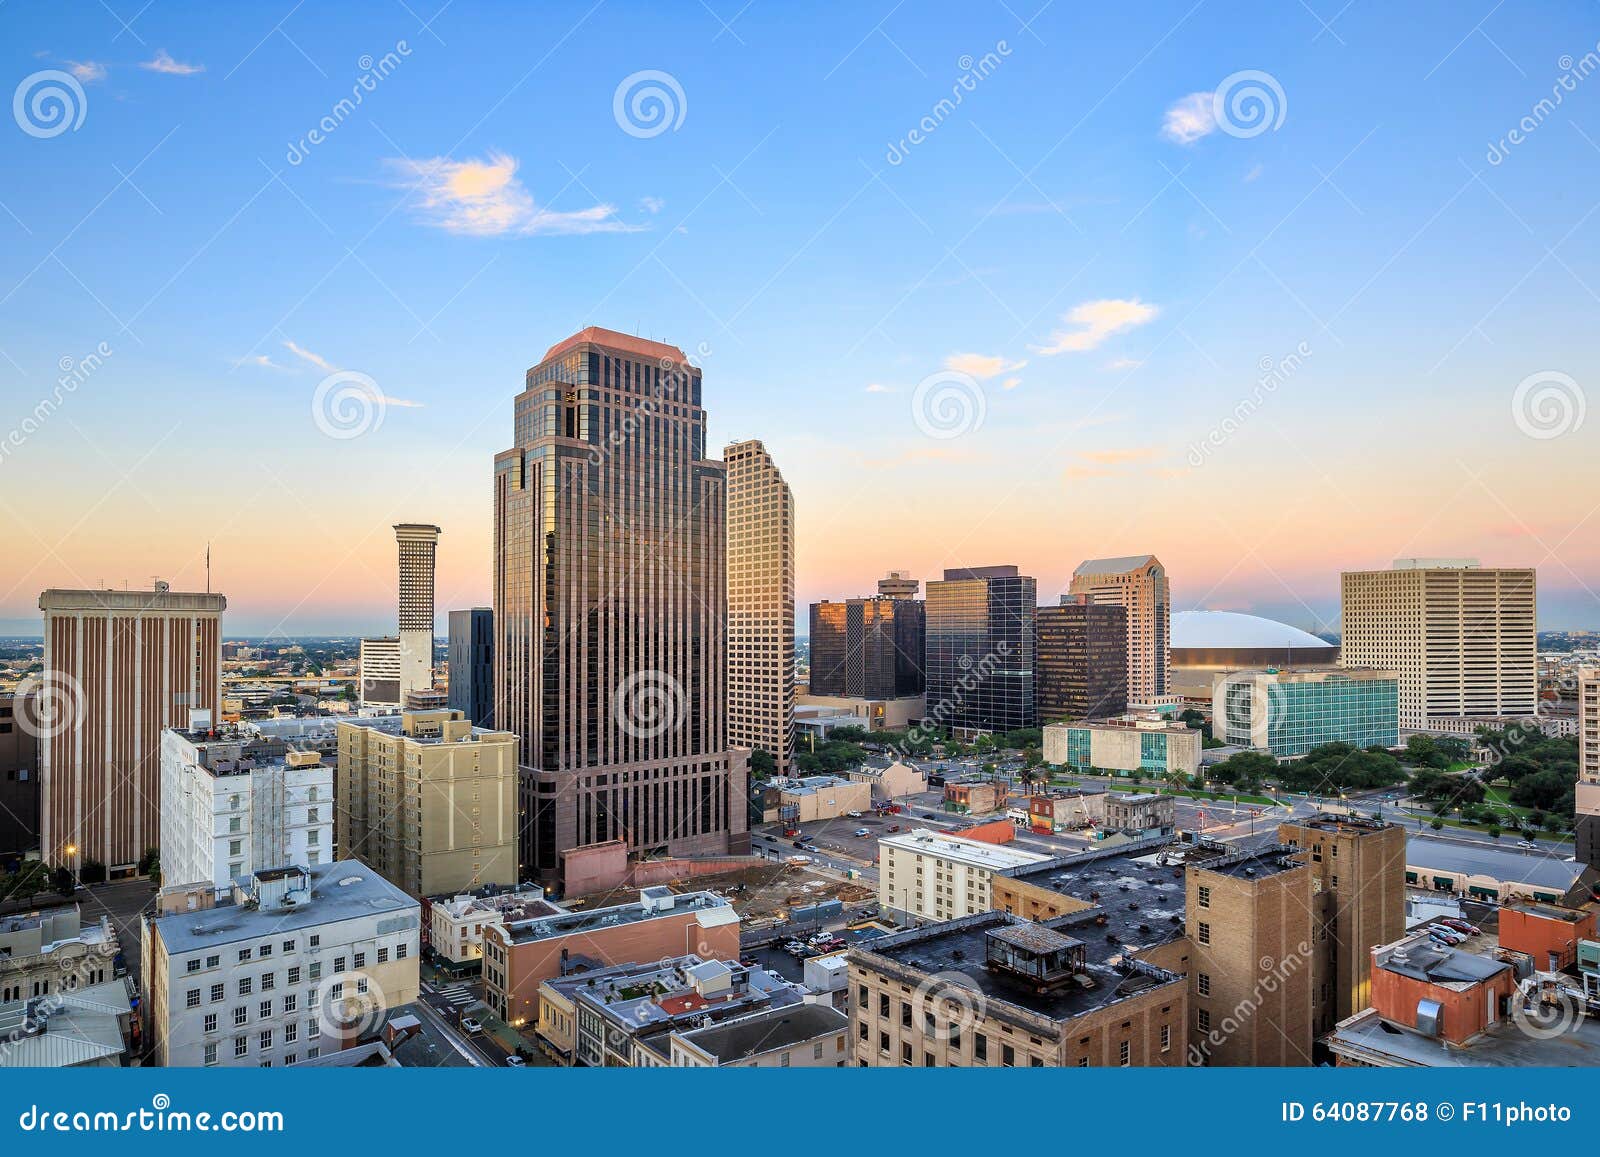 downtown in new orleans, louisiana, usa